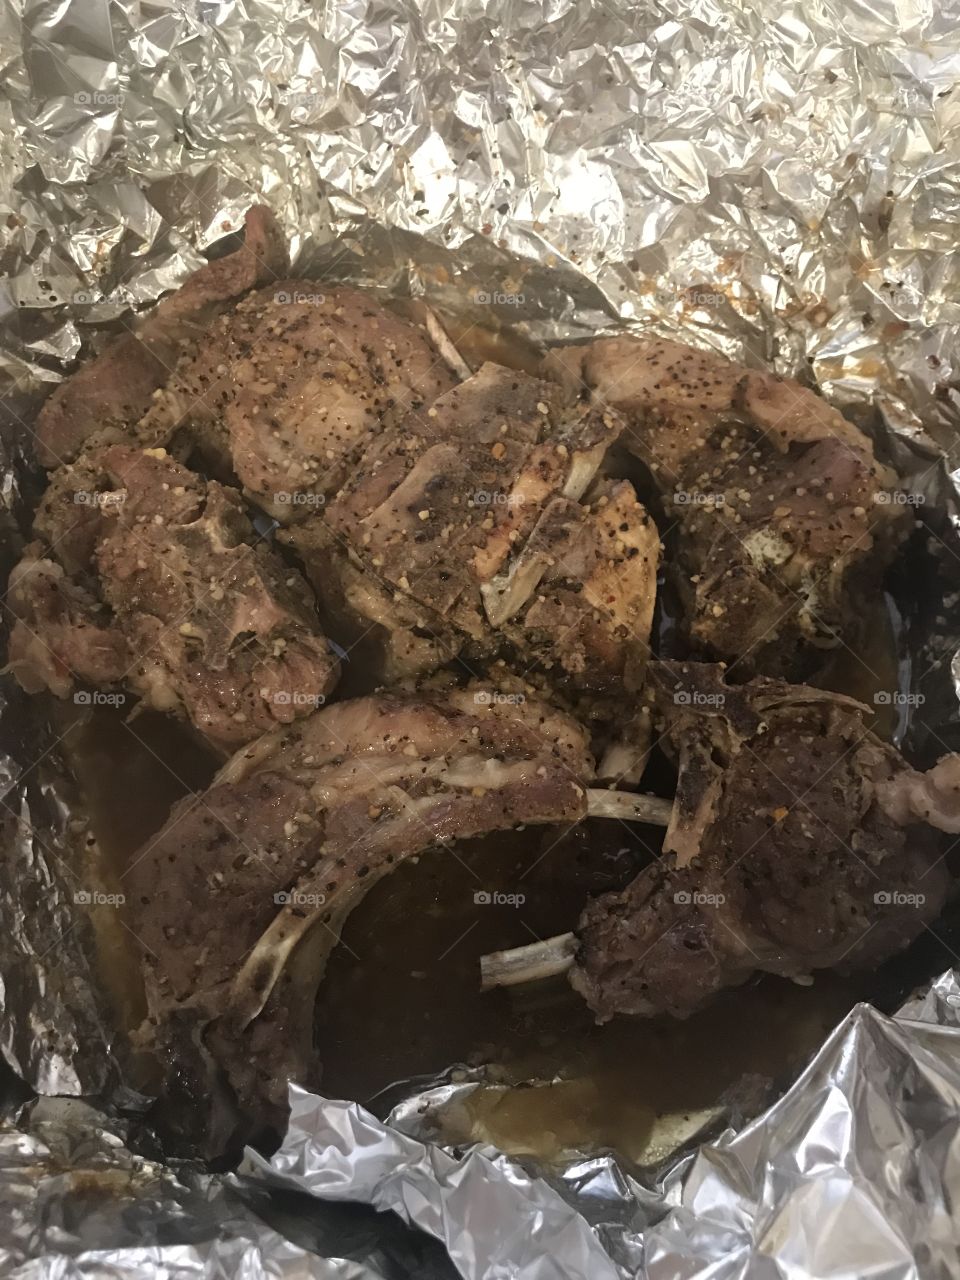 Lamb chops cooked to perfection lol